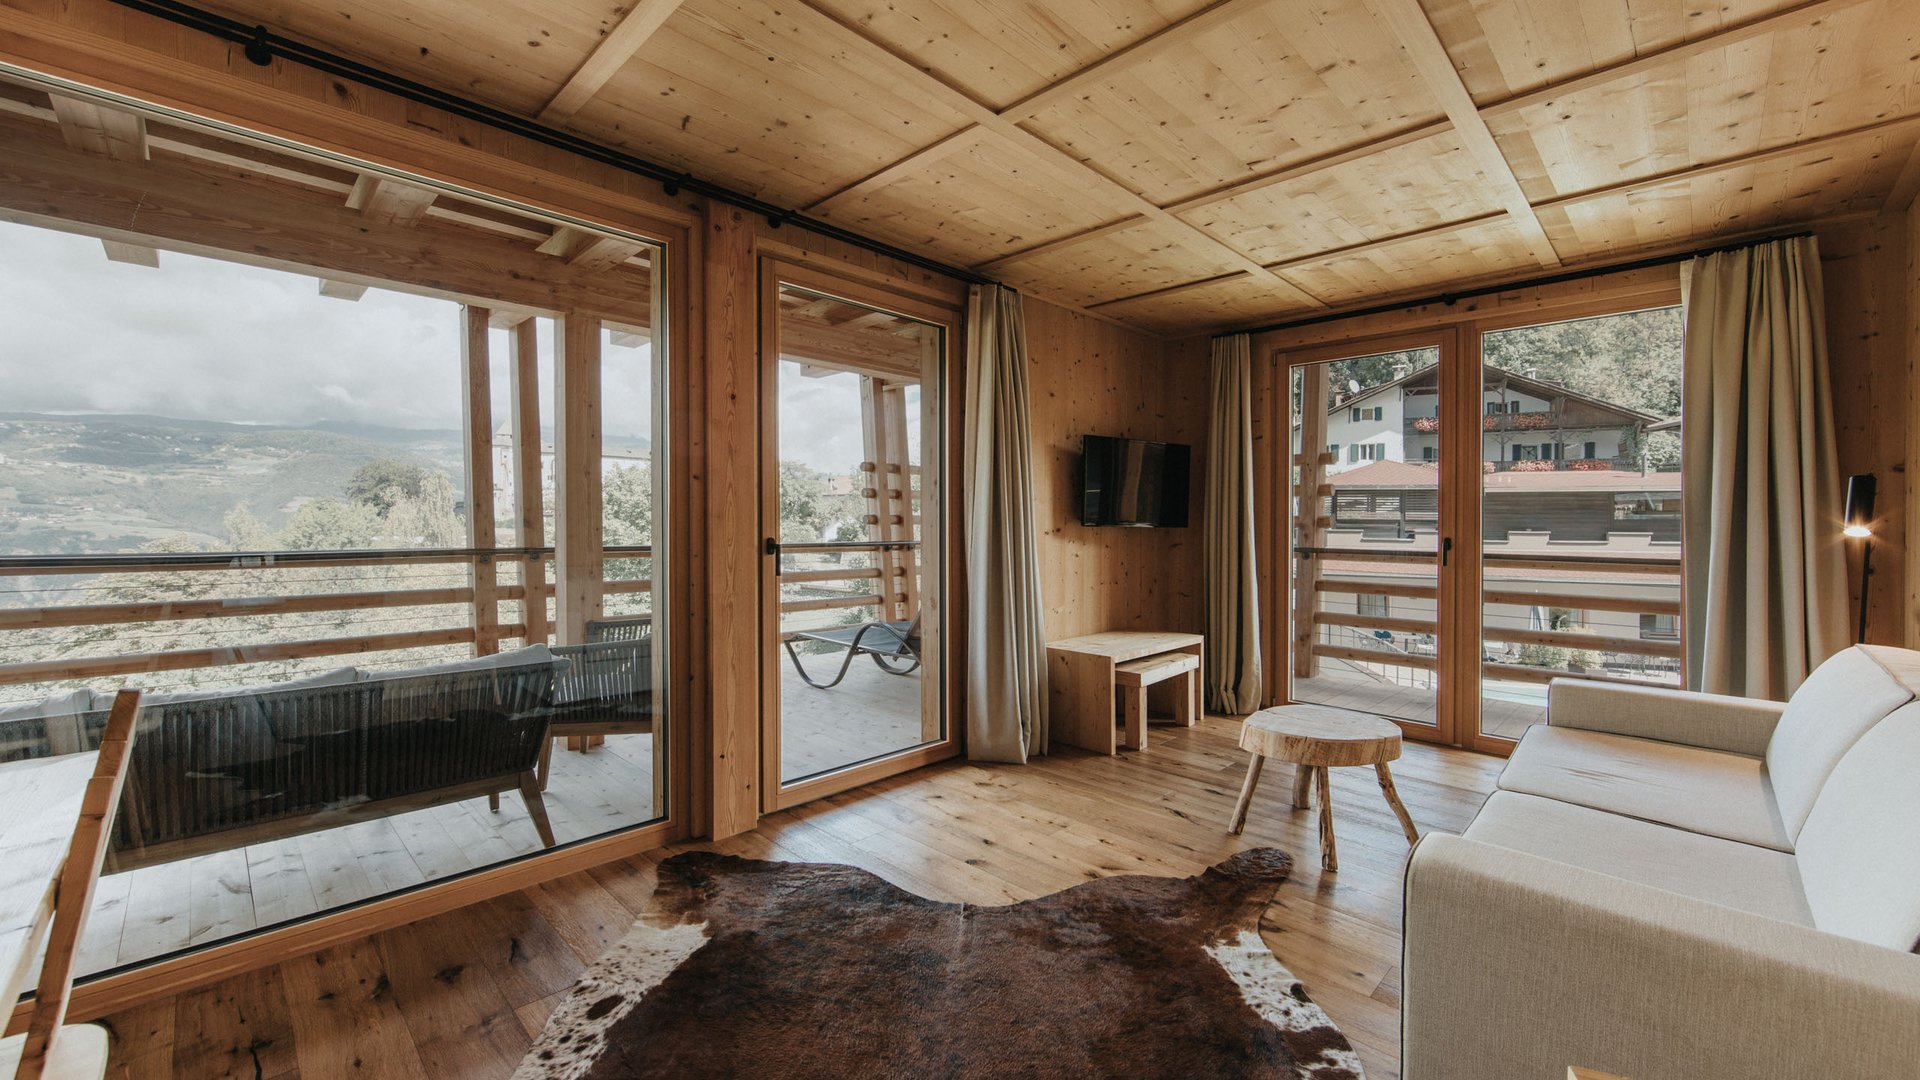 Exclusive design: your holiday apartment in South Tyrol